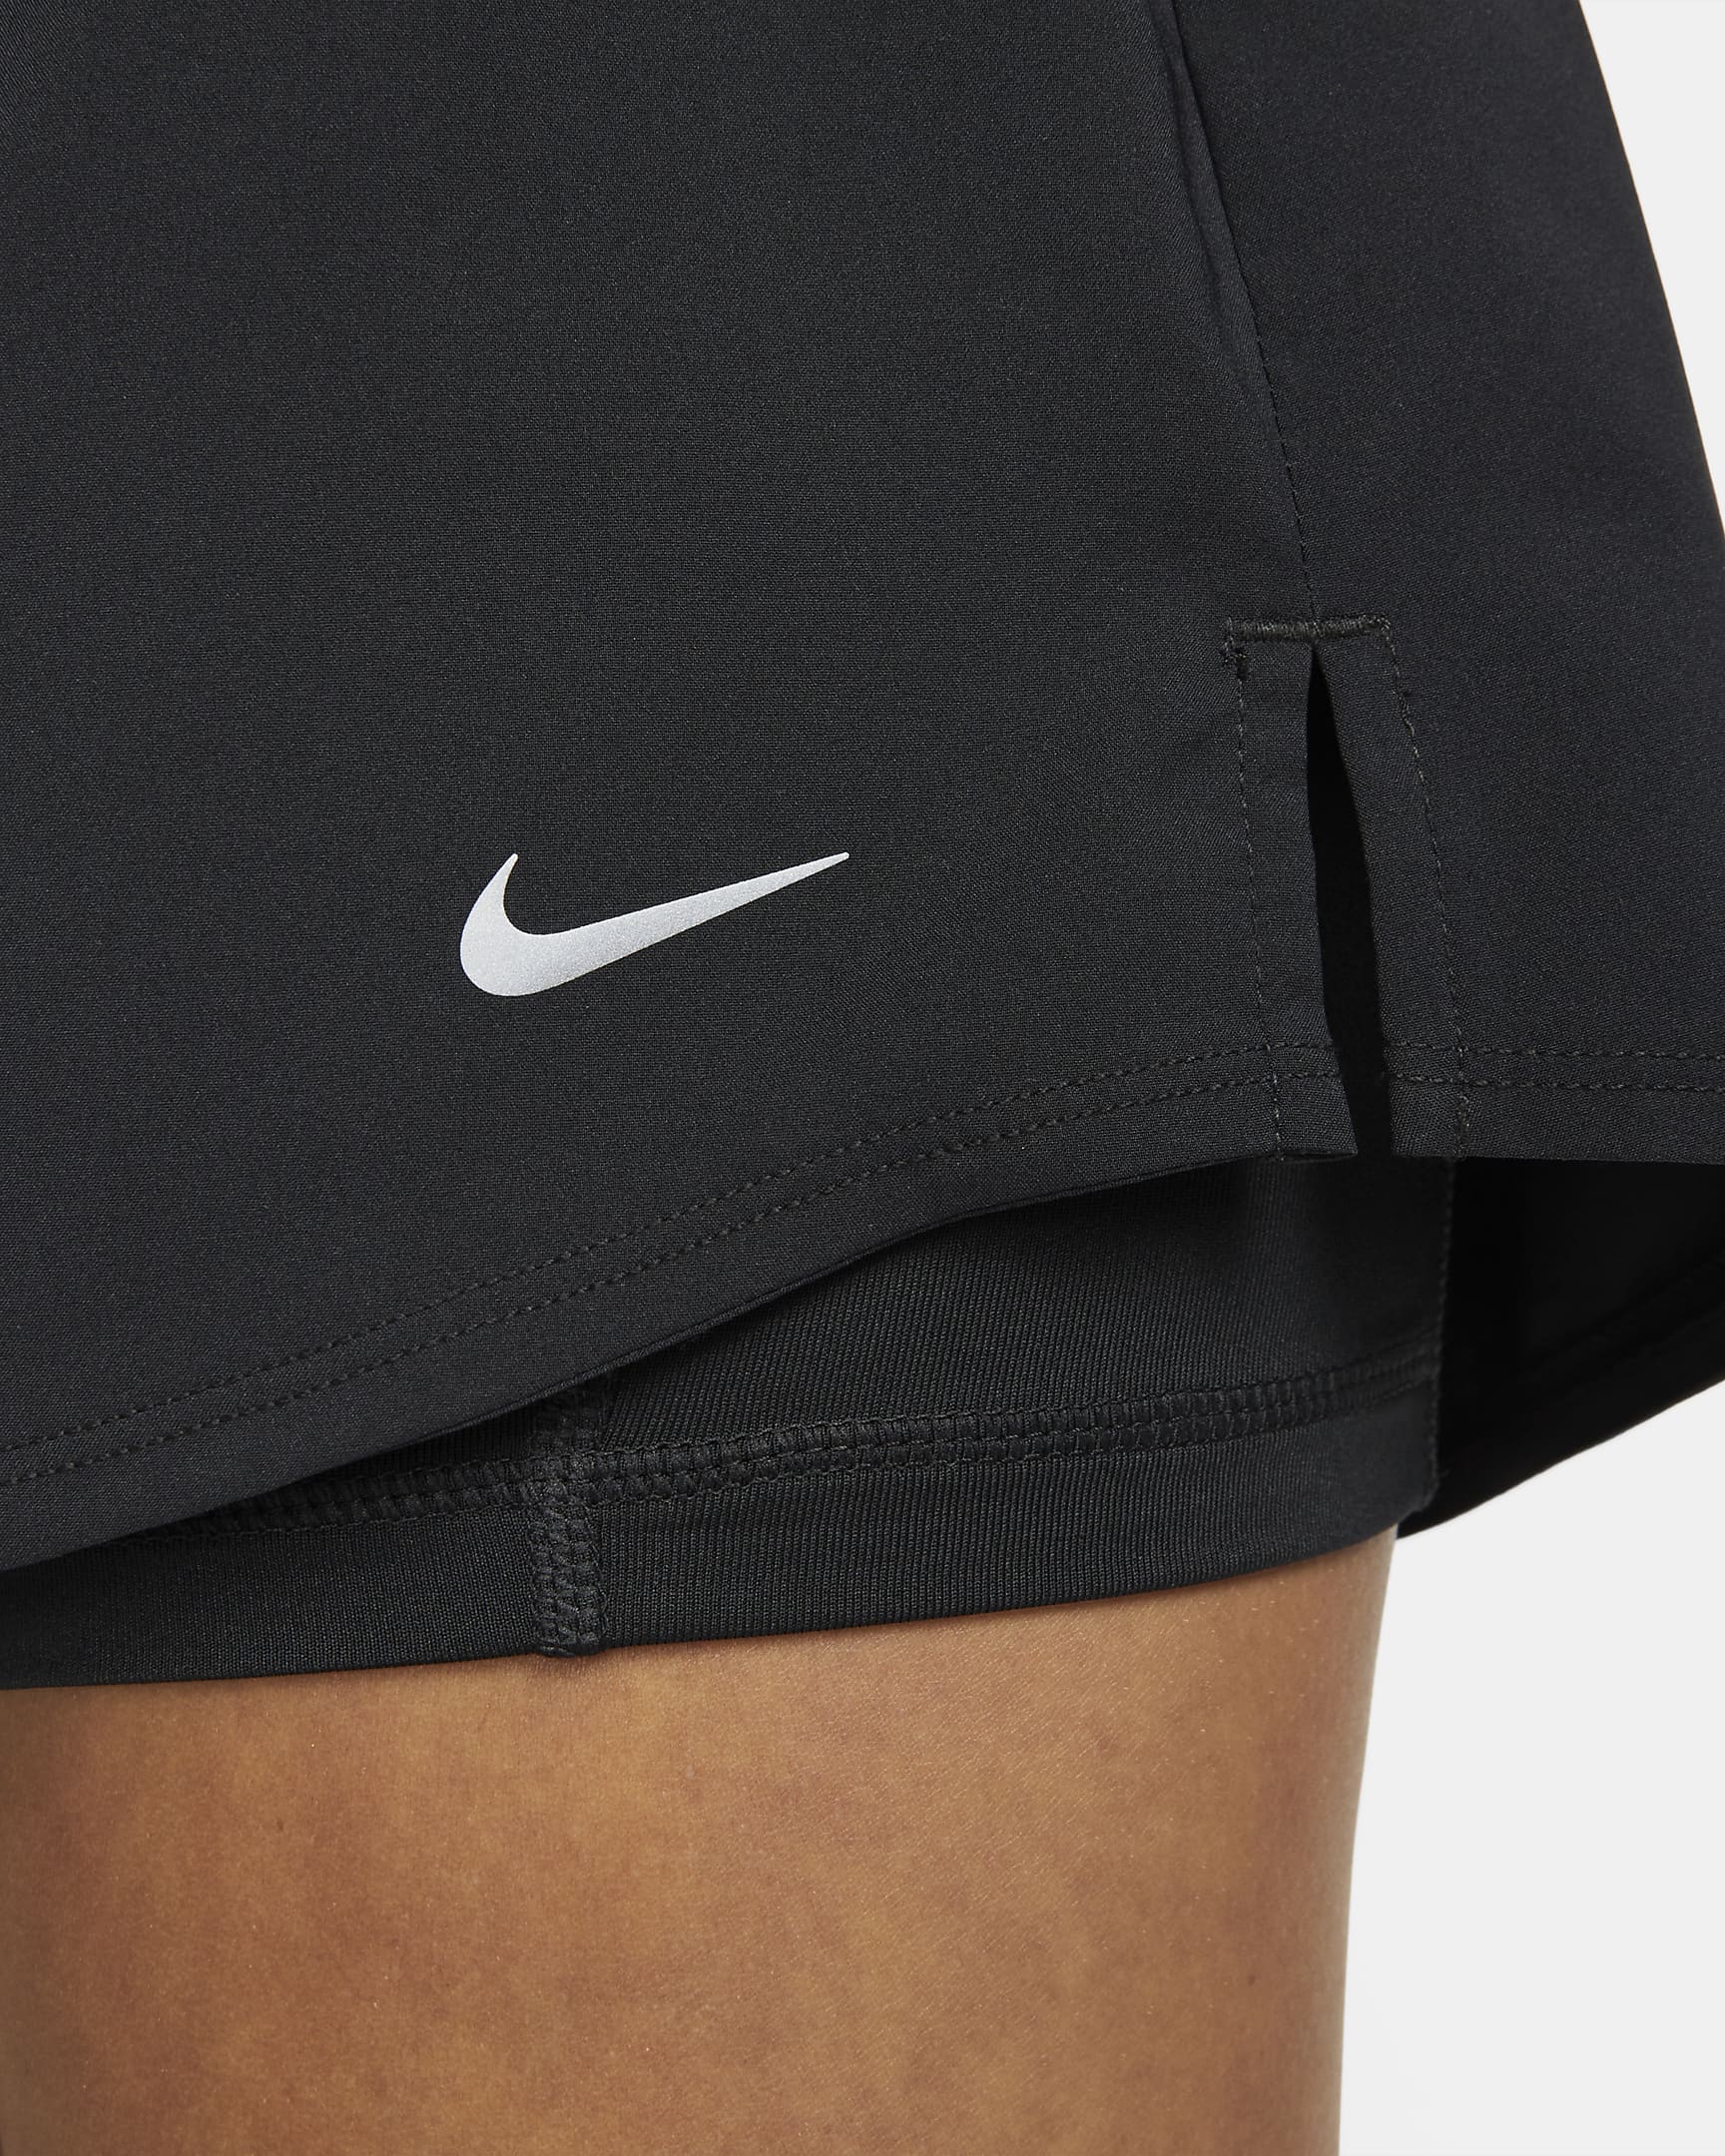 Nike One Women's Dri-FIT High-Waisted 8cm (approx.) 2-in-1 Shorts. Nike UK